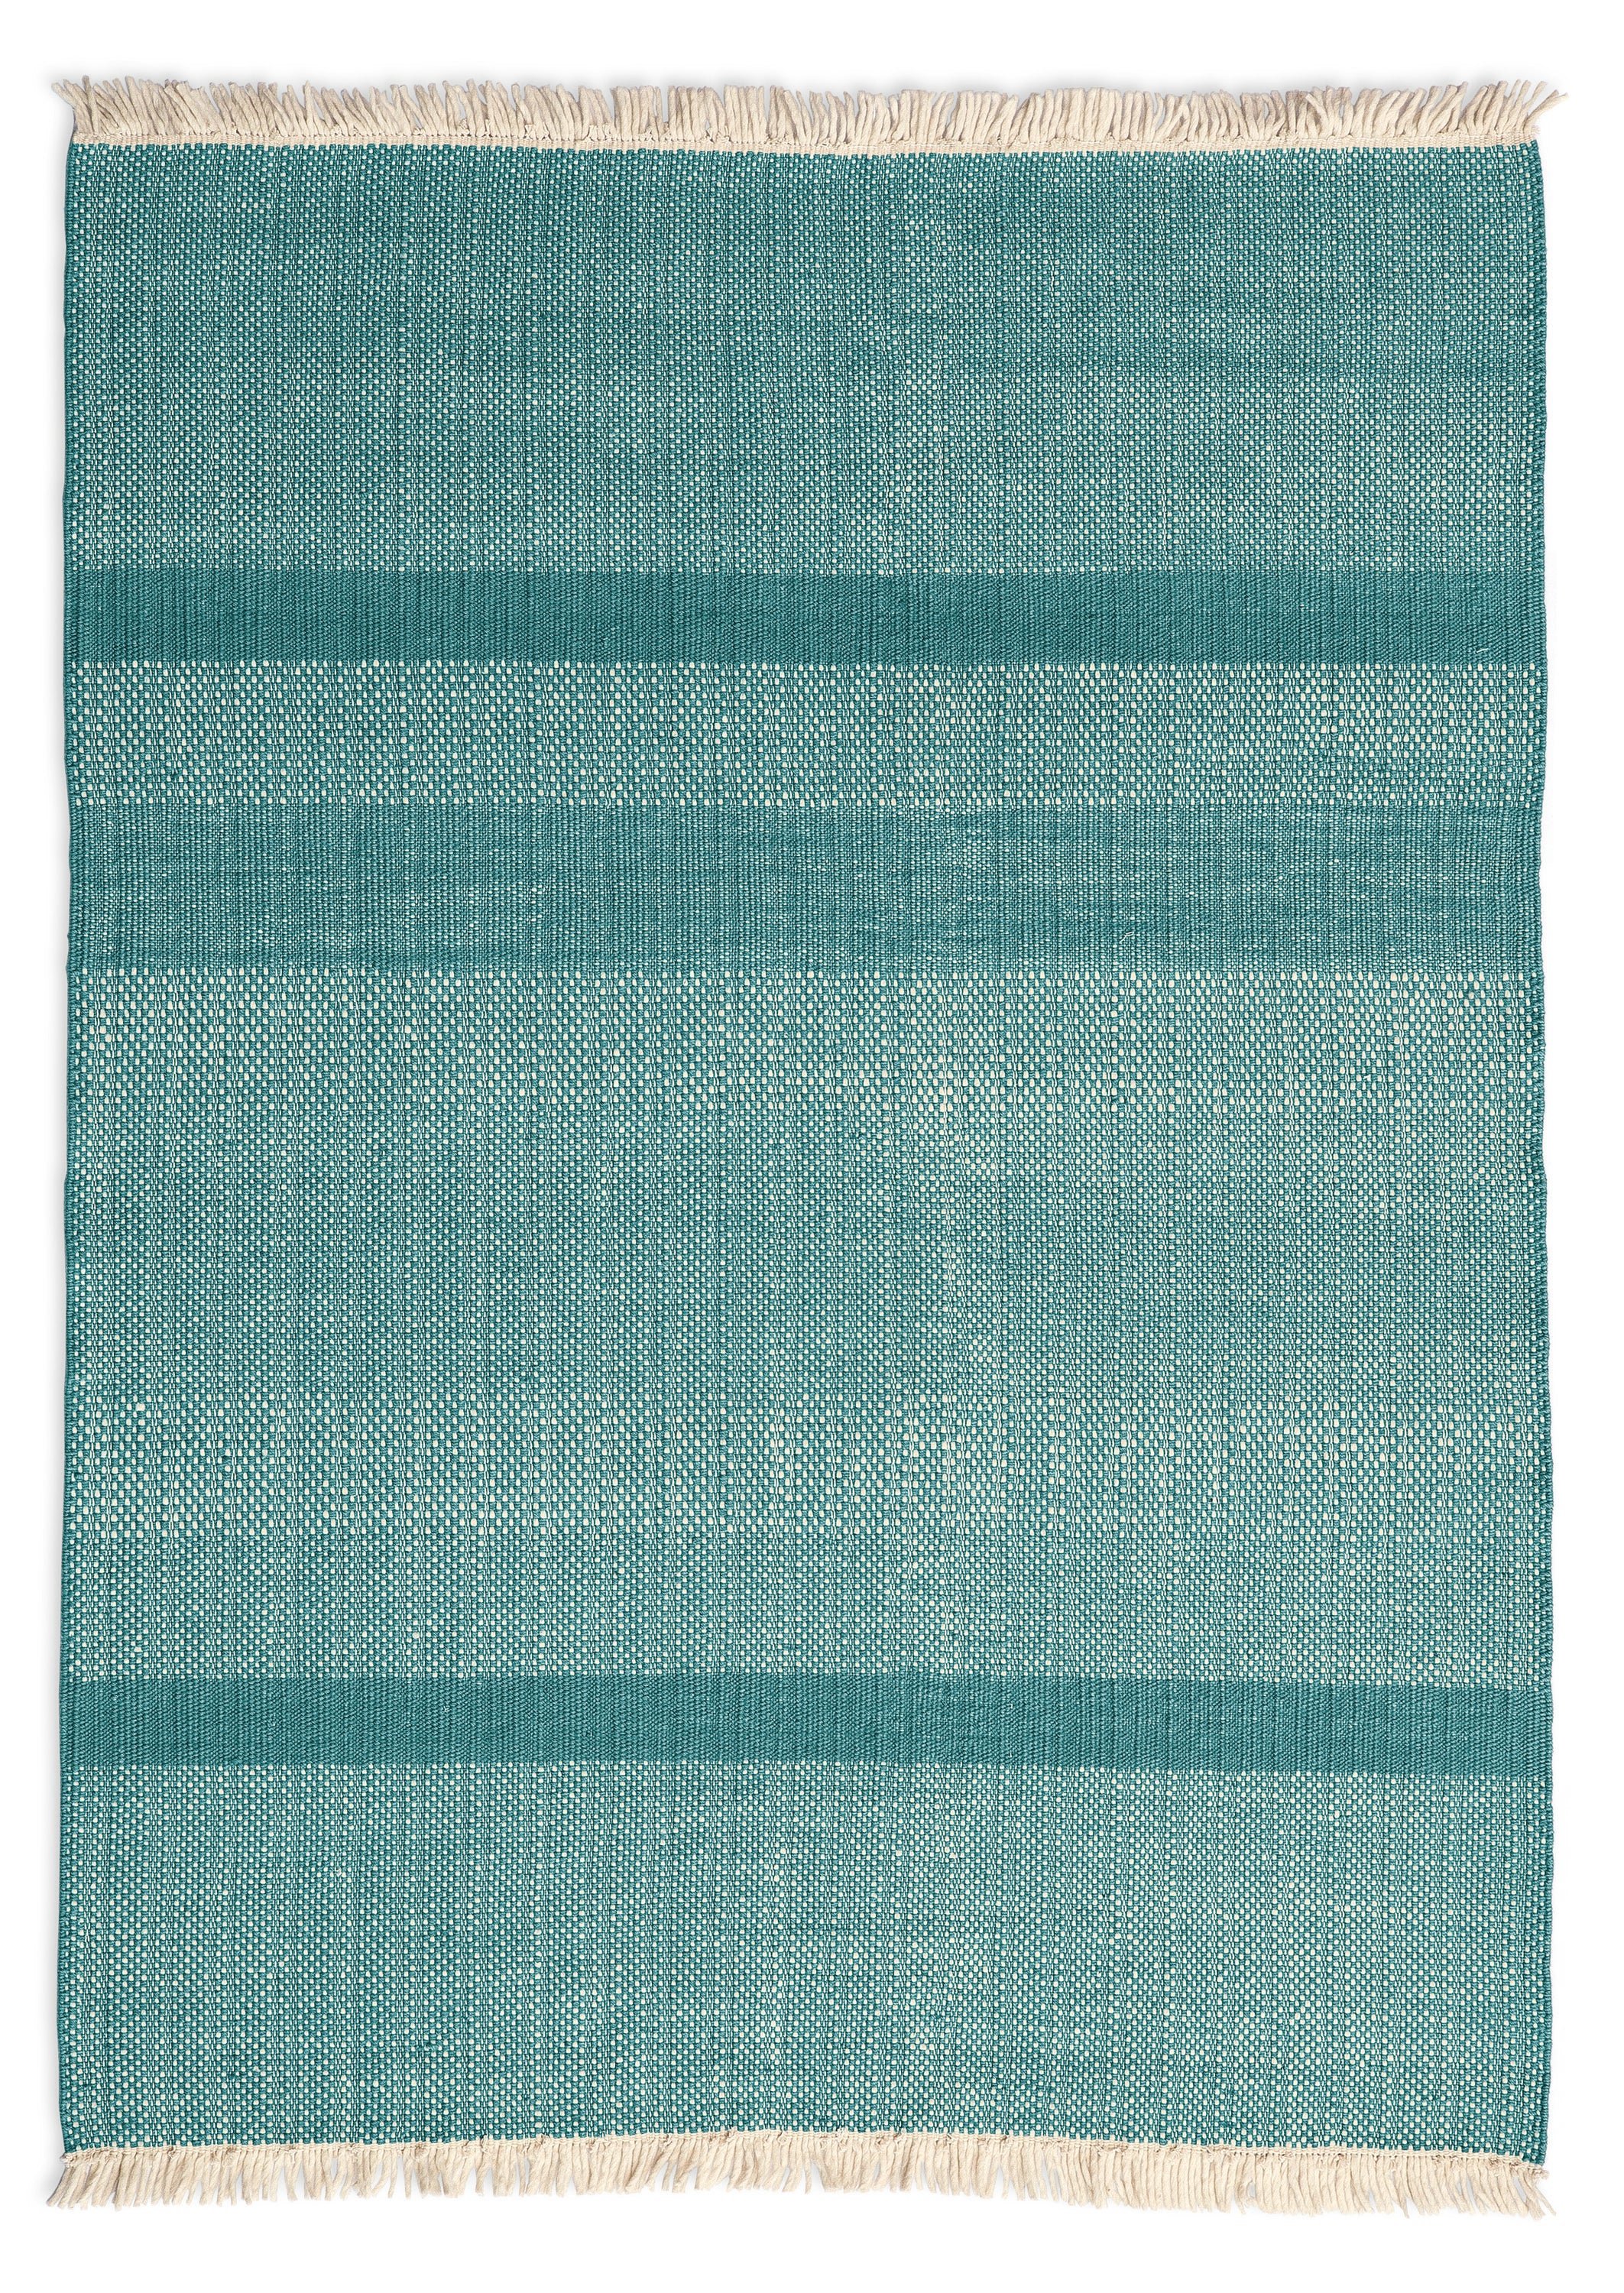 Tres Textured Rug - 6'7''x9'10in / Green